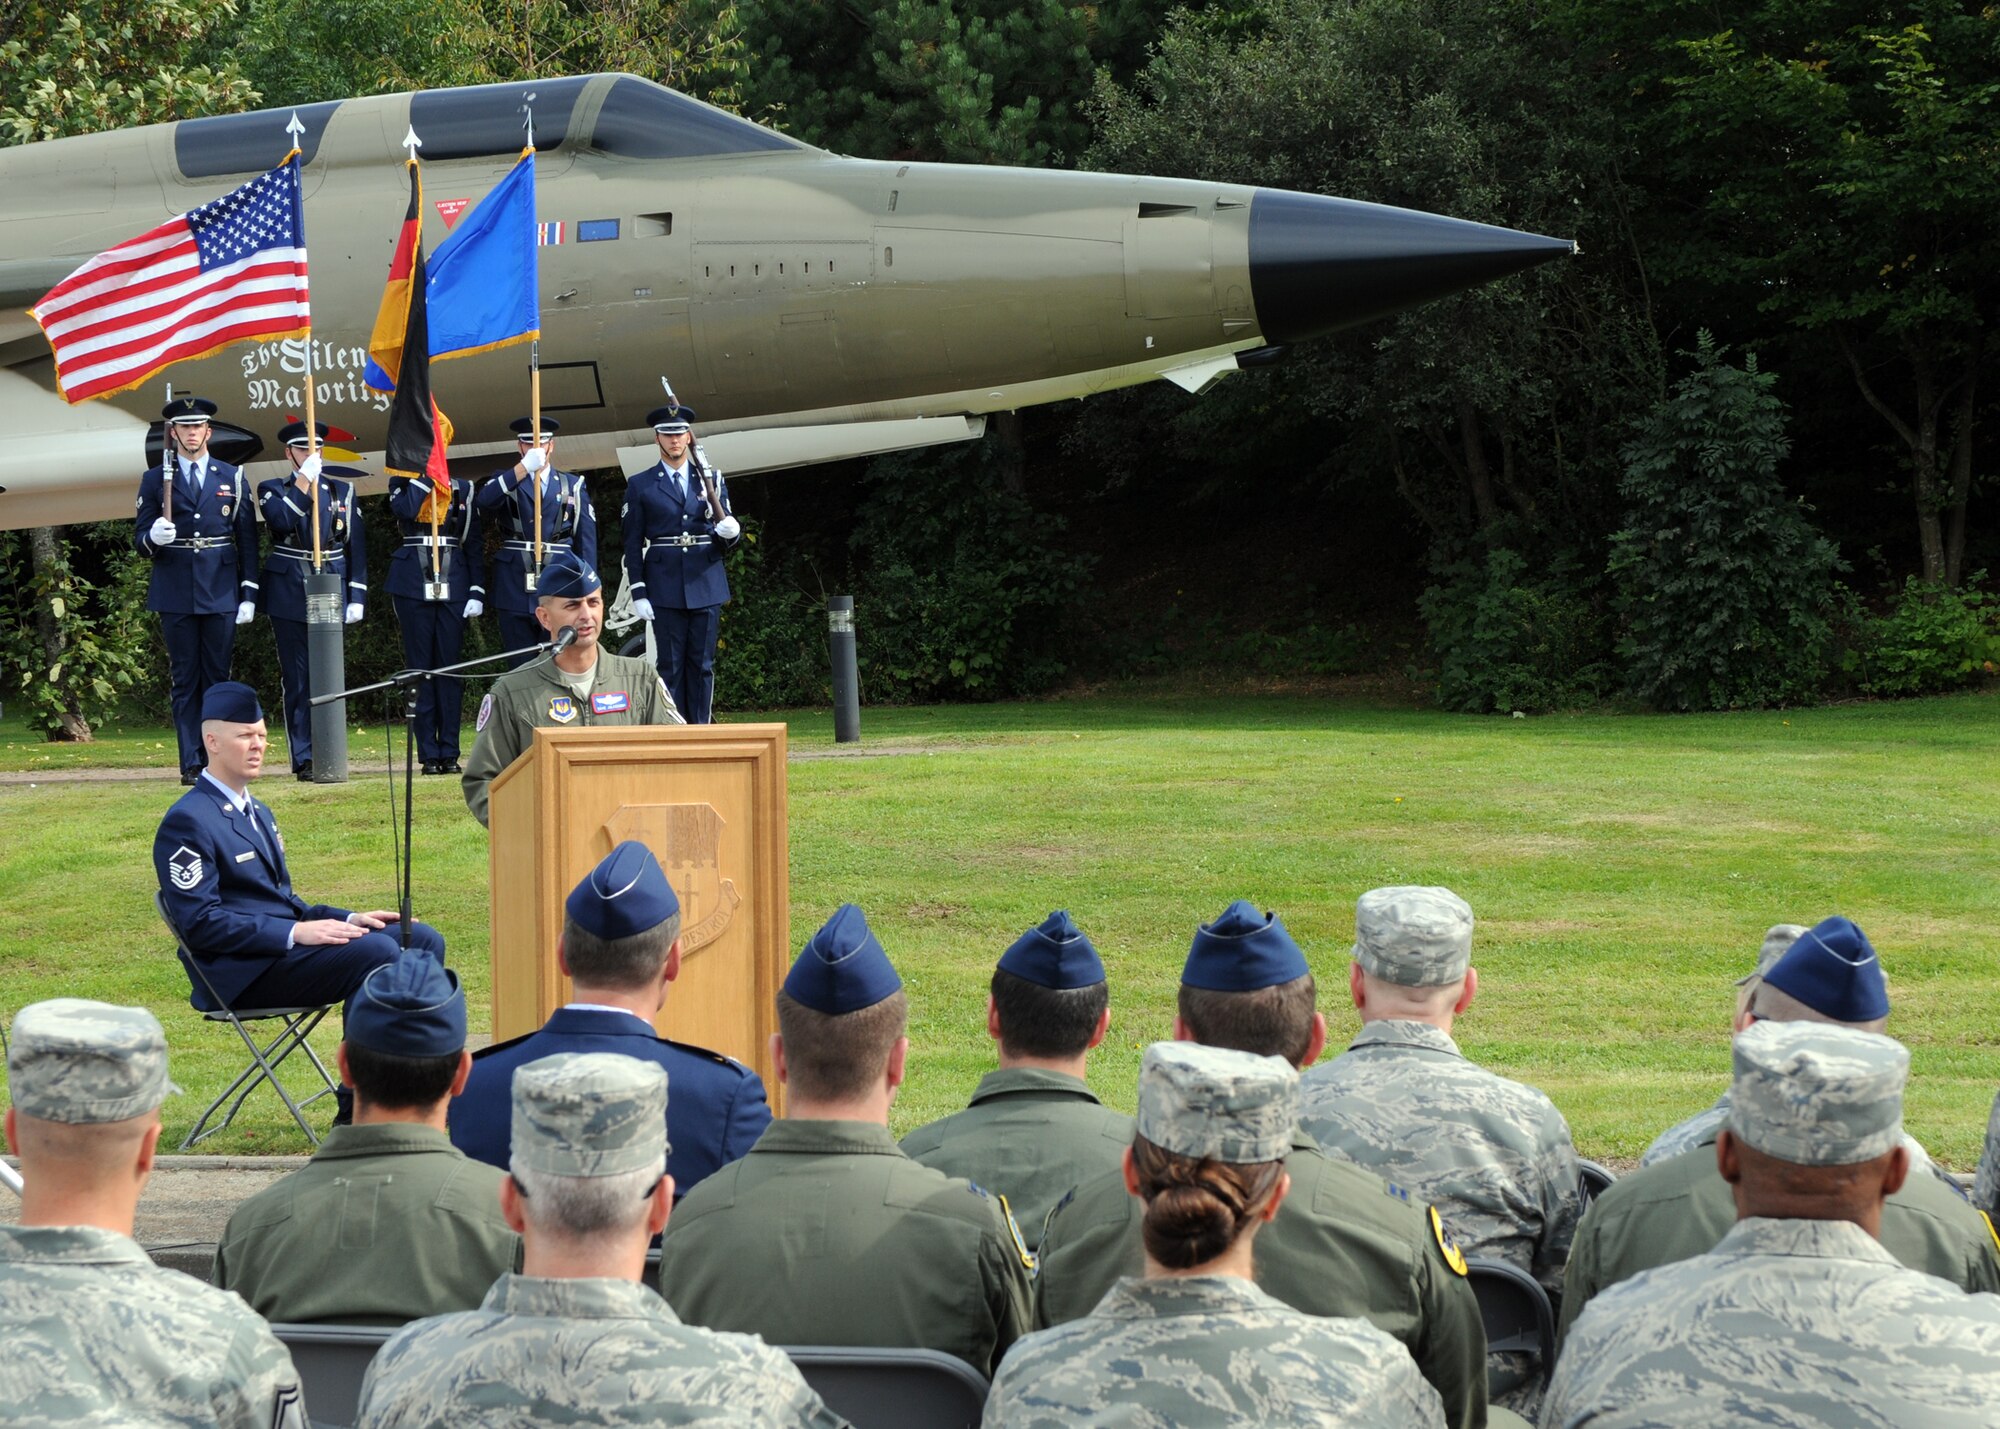 SPANGDAHLEM AIR BASE, Germany – Col. David Julazadeh, 52nd Fighter Wing vice commander, speaks during the POW/MIA ceremony at the air park here Sept. 16. The ceremony is held every year to remember those who have served and been taken prisoner or have been listed as missing in action. (U.S. Air Force photo/Senior Airman Christopher Toon) 